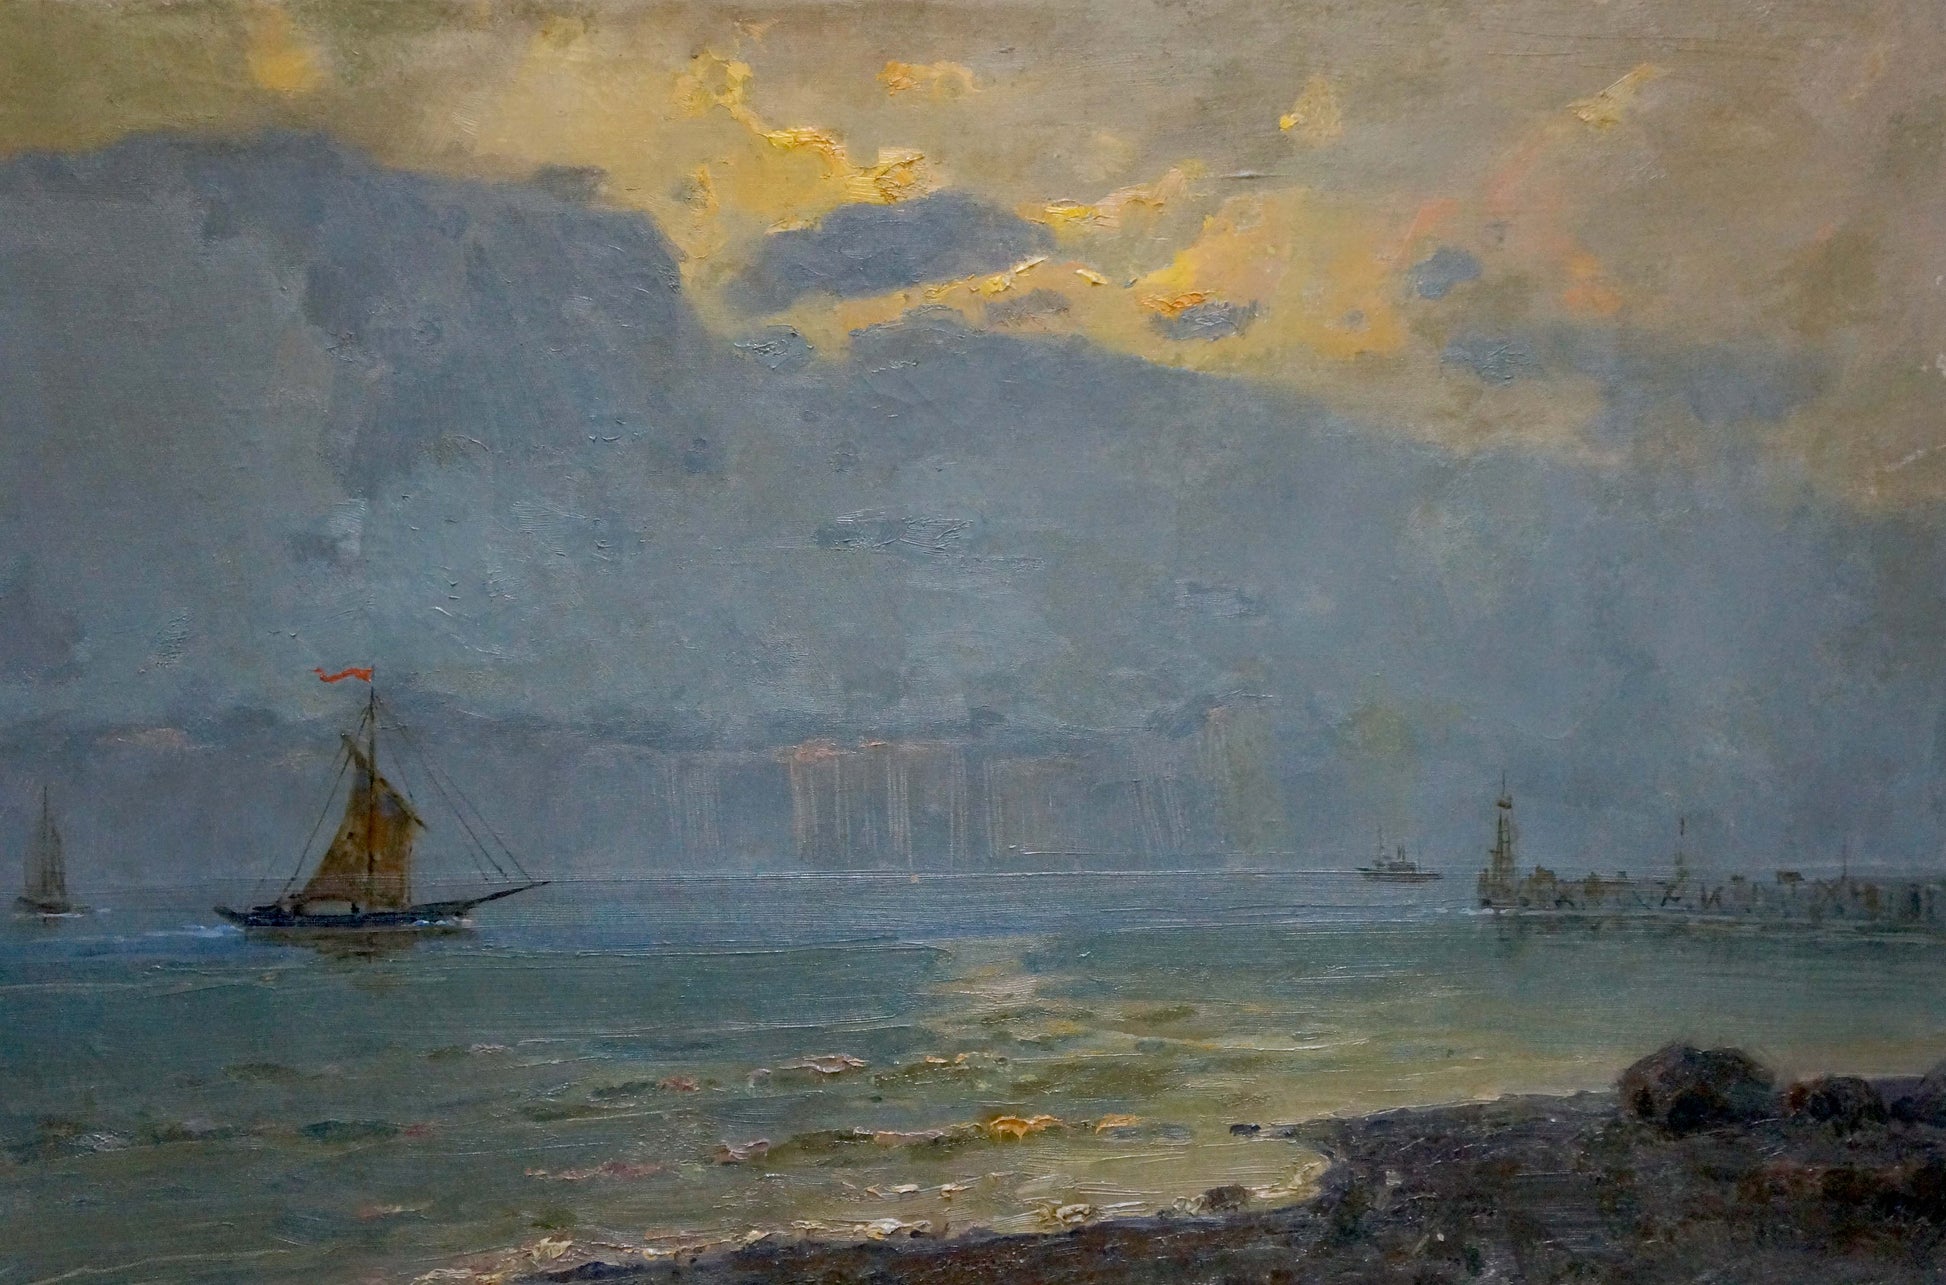 The artwork portrays ships on calm waters, the artist's name remaining a mystery